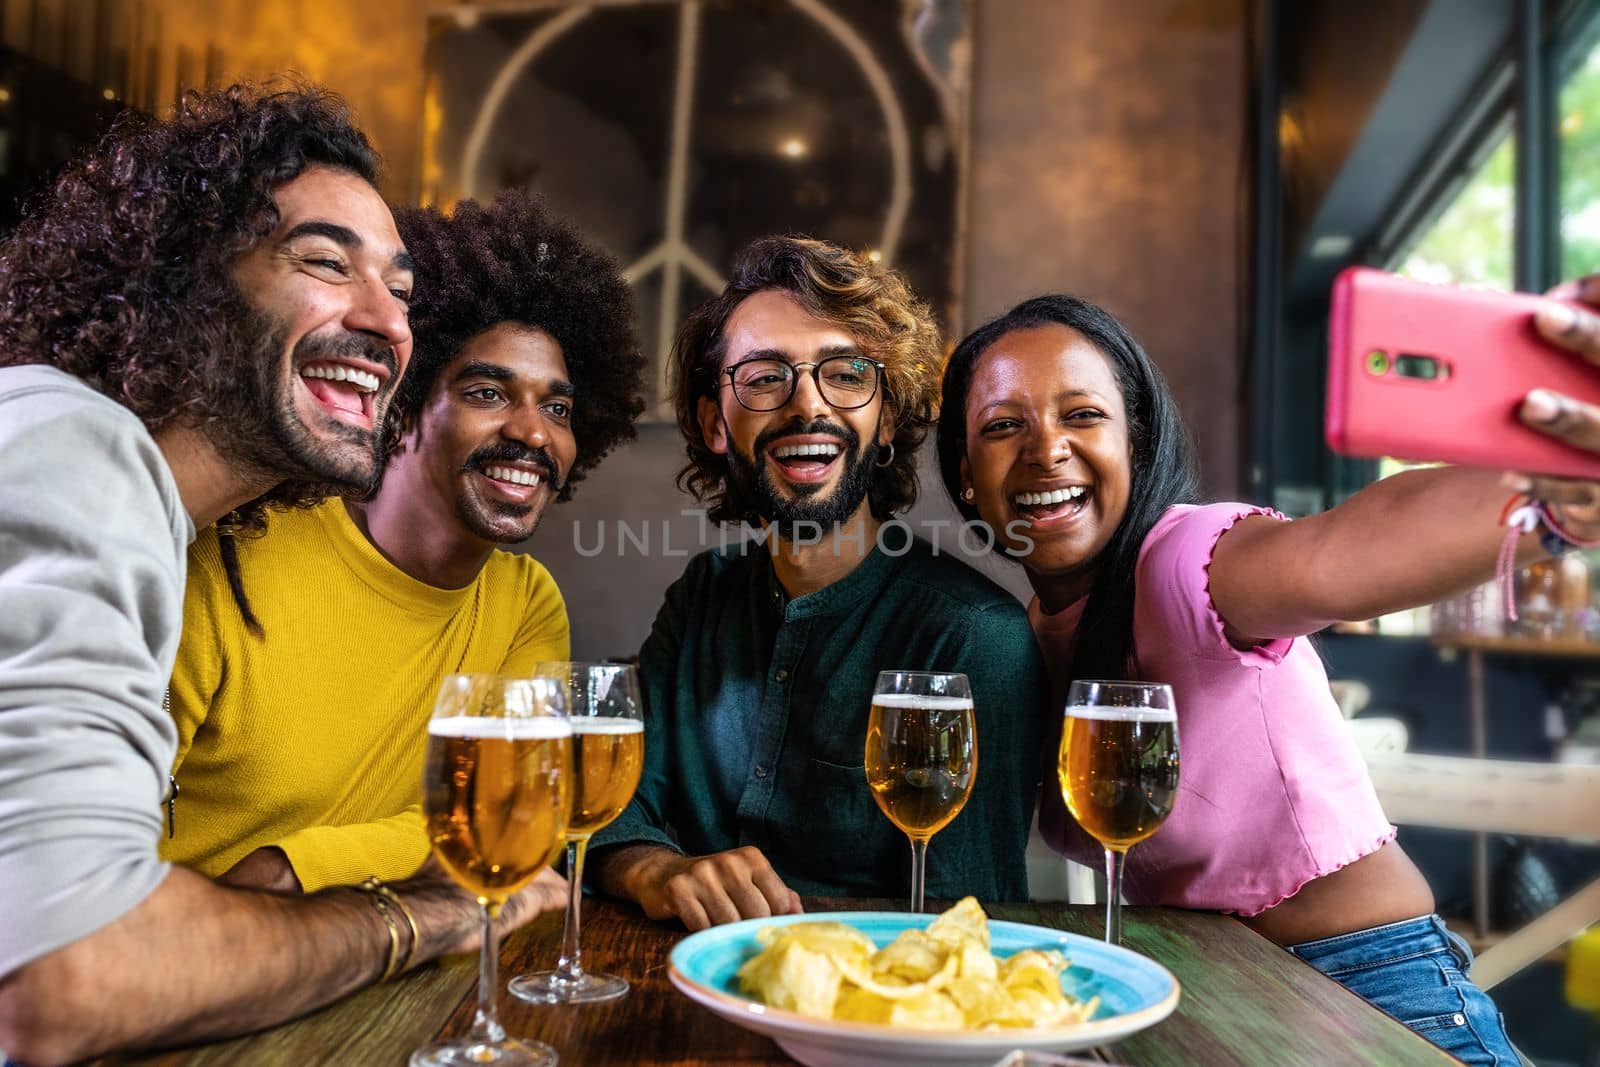 African American young woman taking selfie with group of friends using phone in a bar enjoying some beer and food. Lifestyle concept.